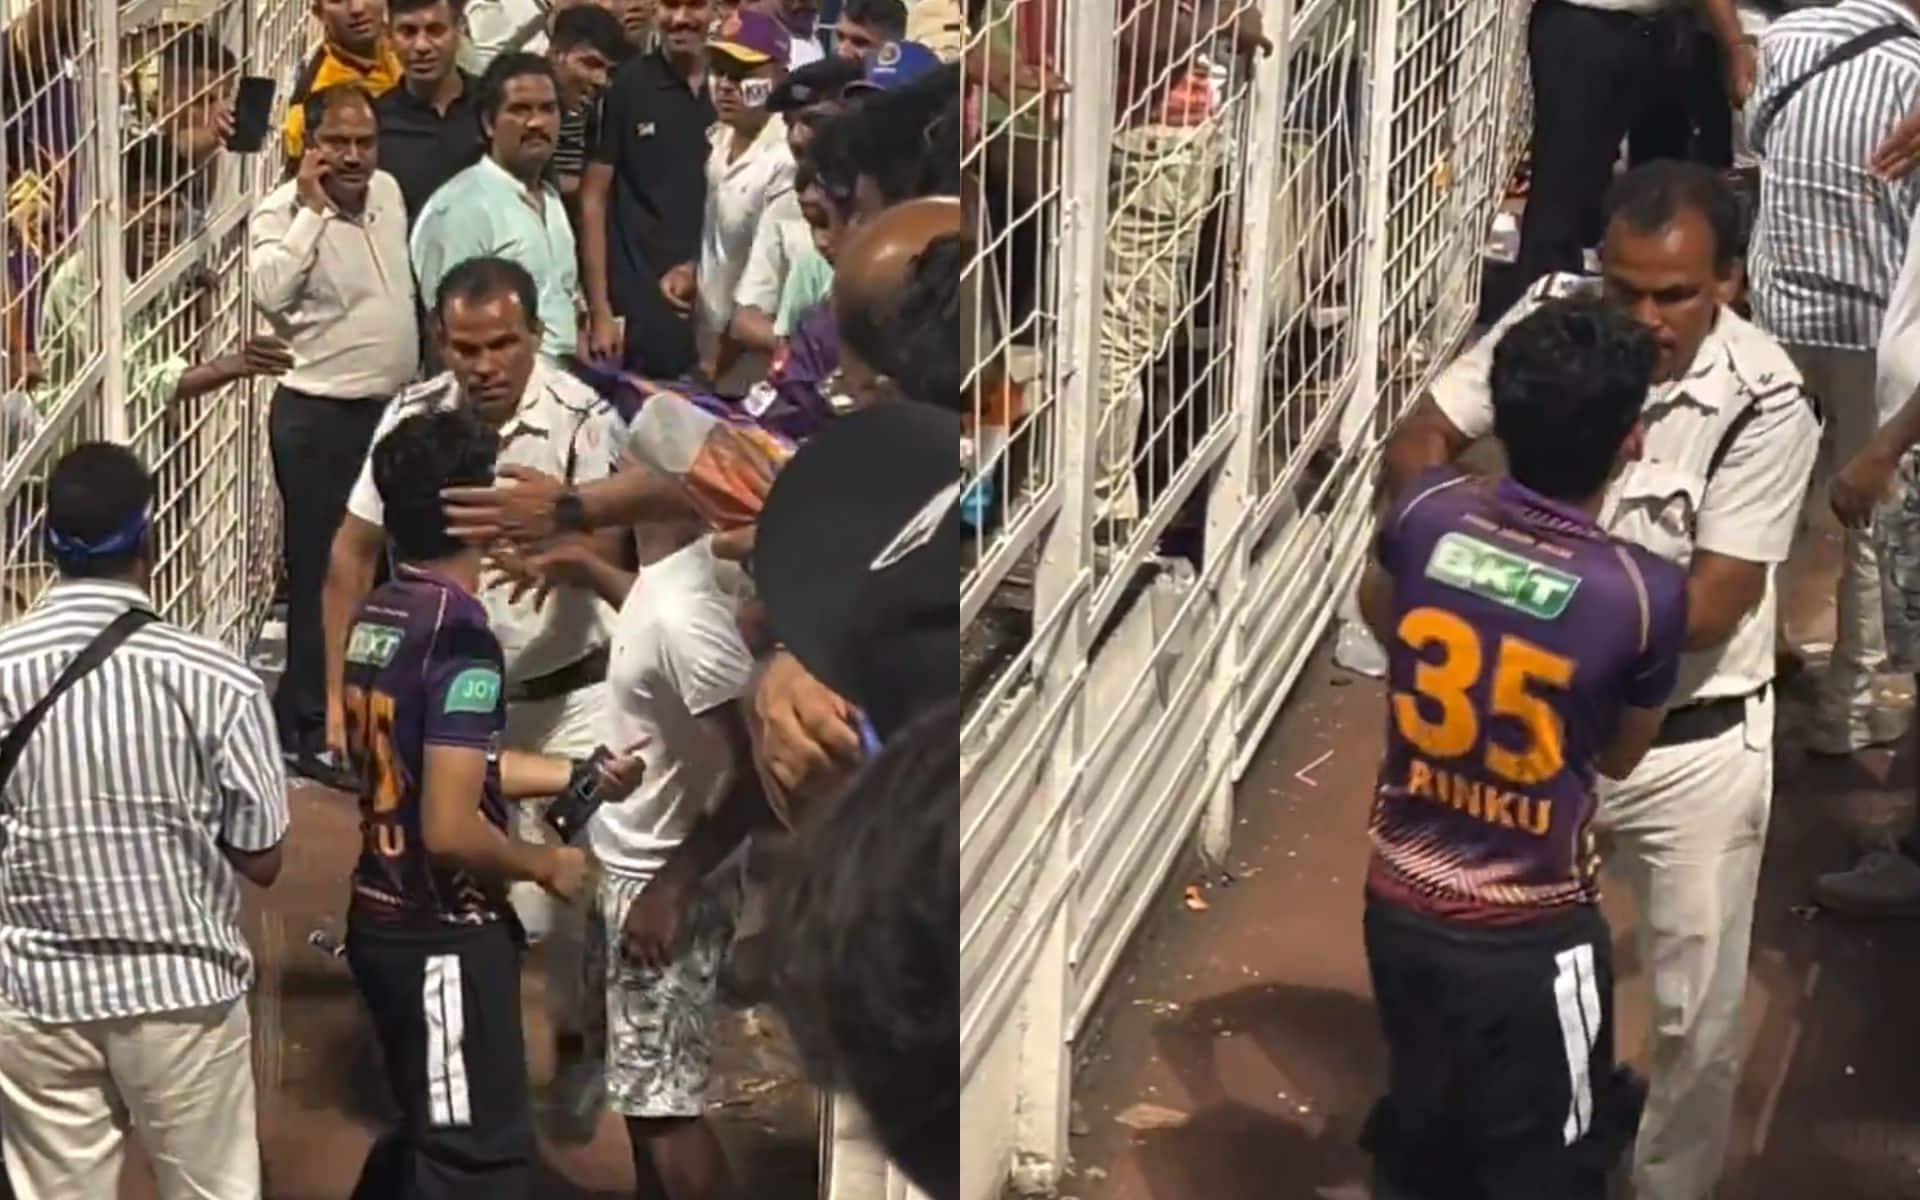 KKR fan getting caught by police for stealing a ball (x.com)